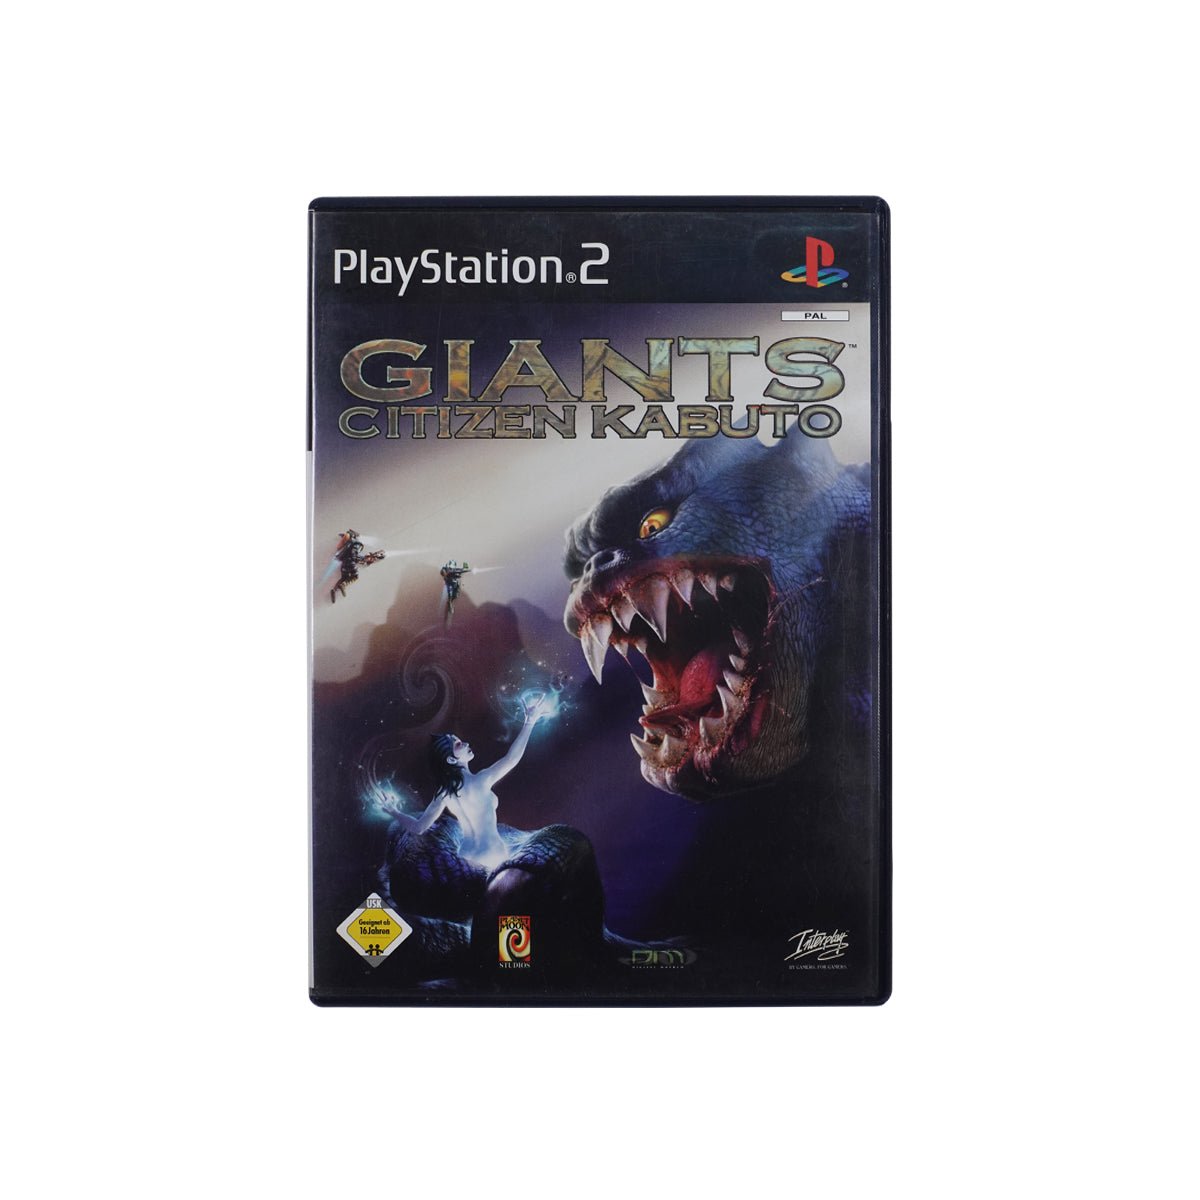 (Pre-Owned) Giants Citizen Kabuto - PlayStation 2 - Store 974 | ستور ٩٧٤